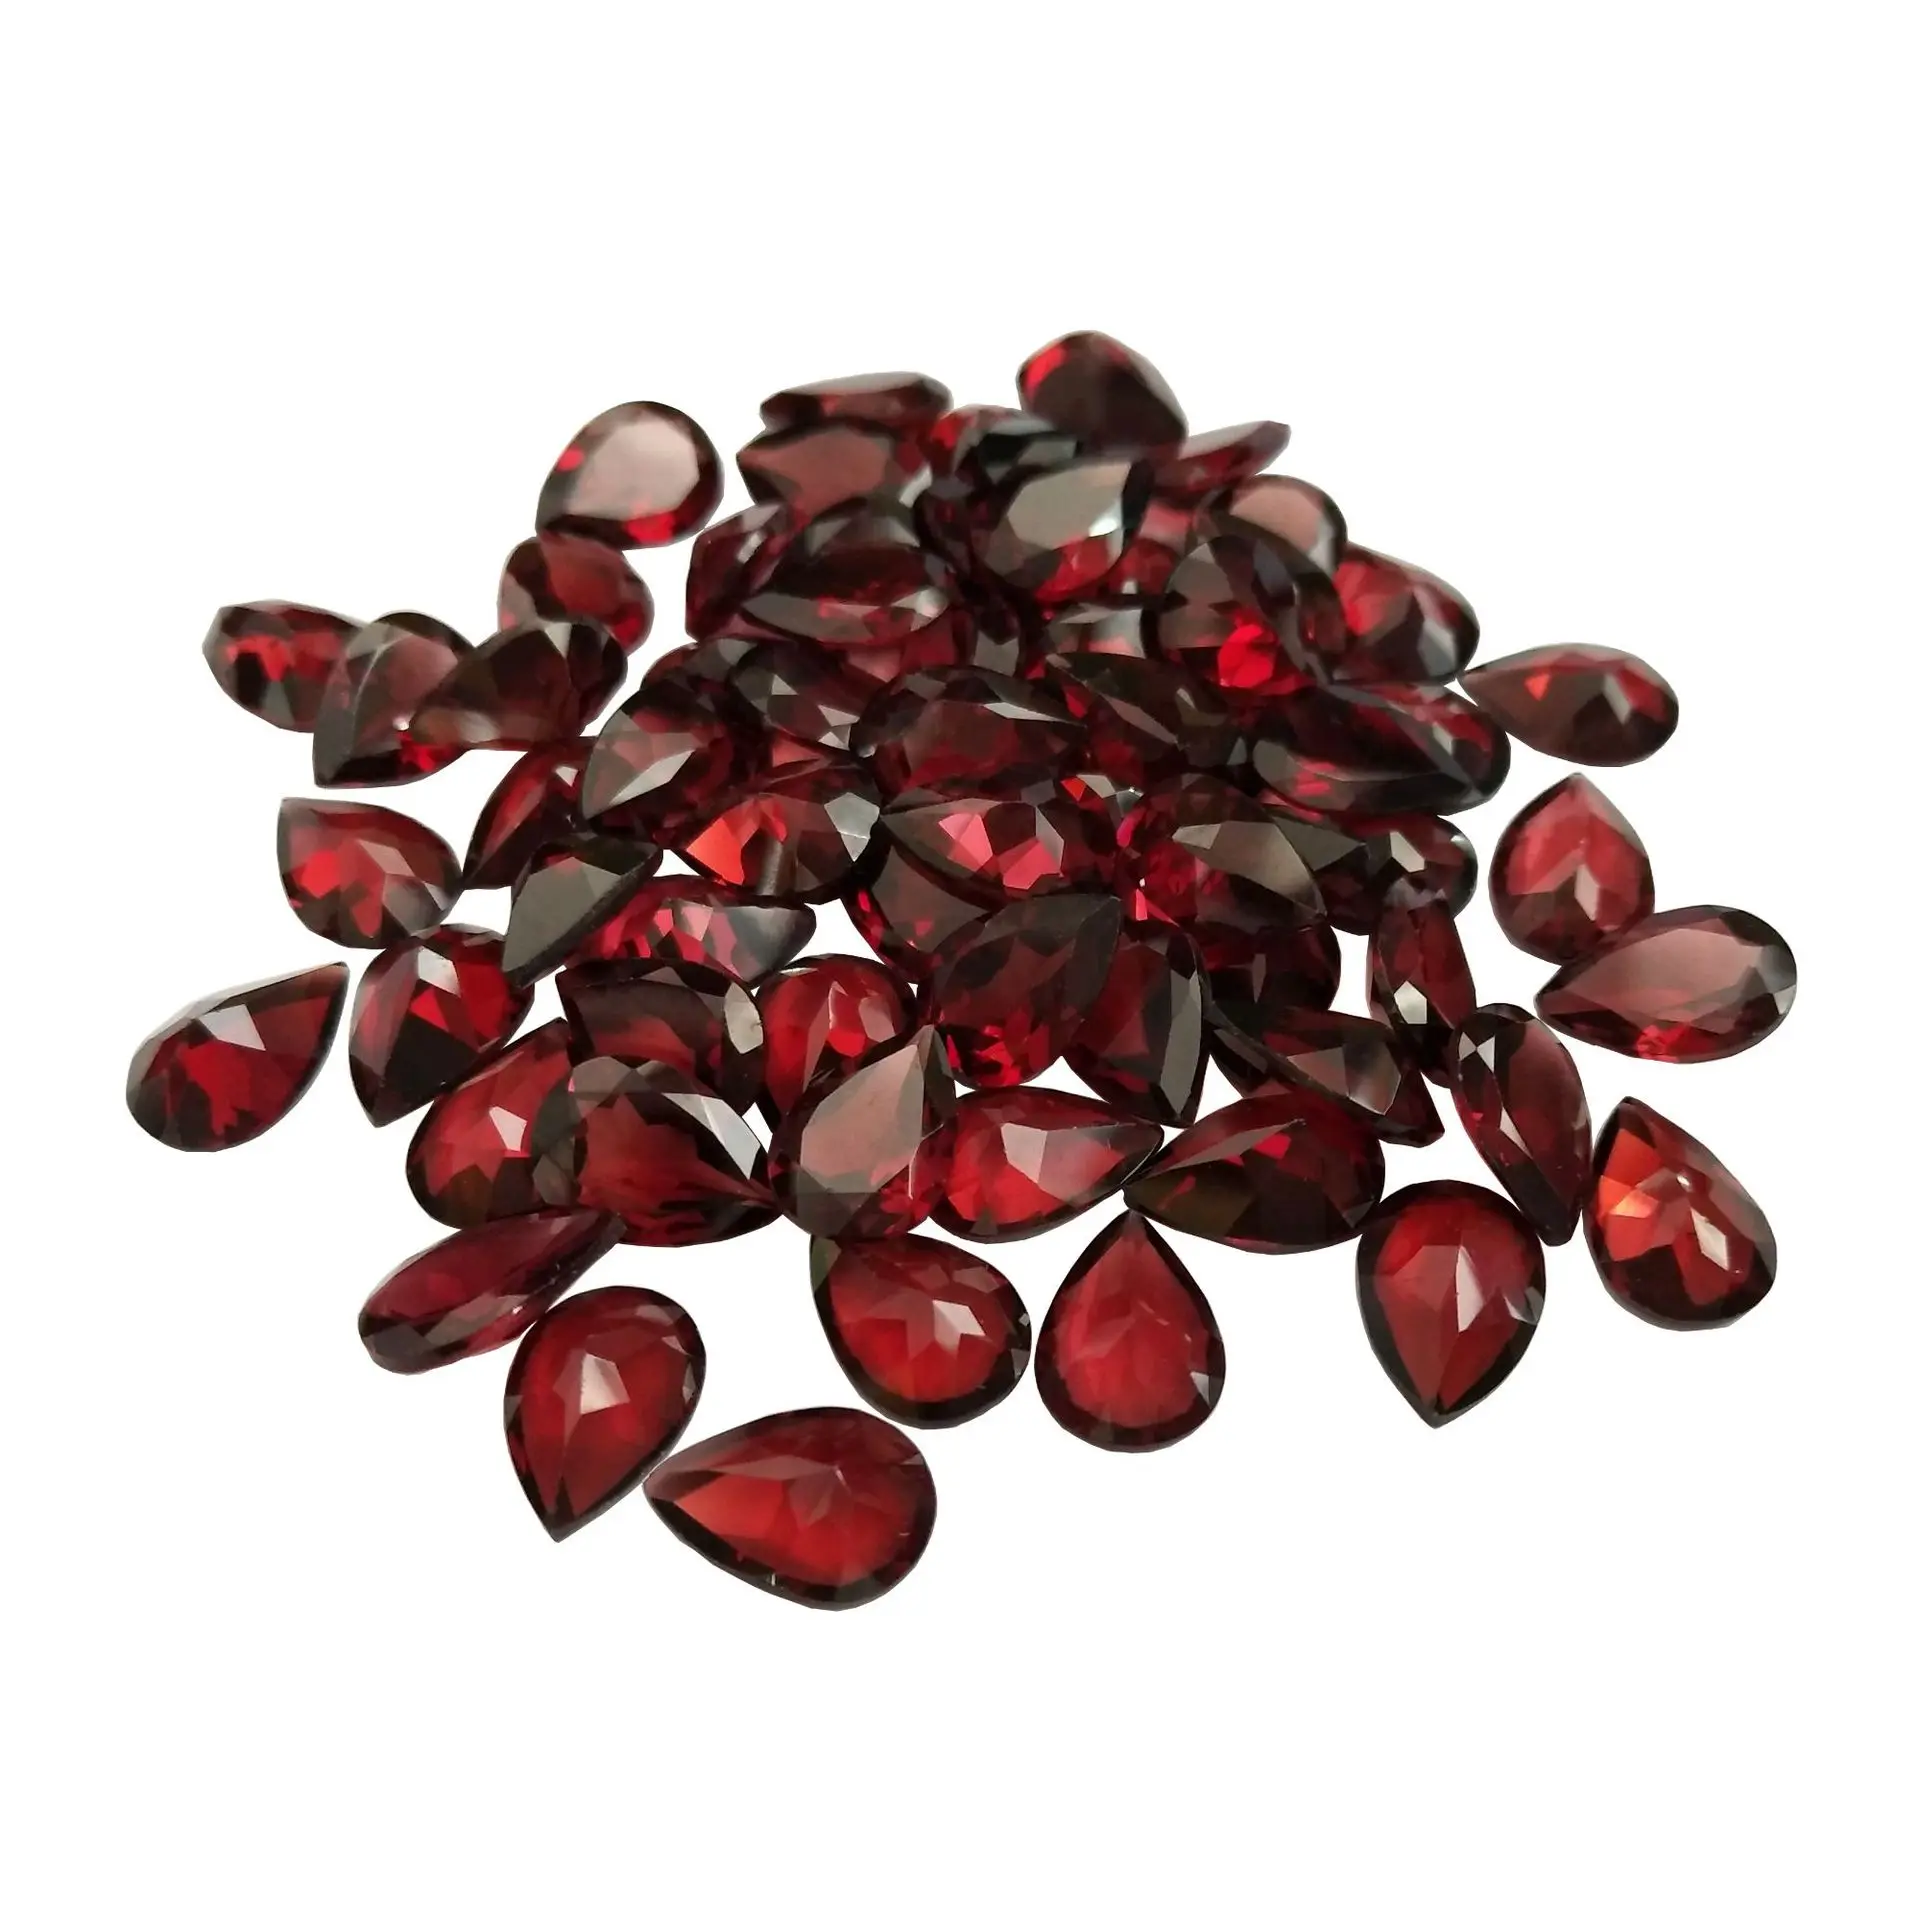 

wholesale factory Garnet Rose cut Slices Faceted Cabochon Gemstone tear drop garnet Beads For setting DIY Jewelry Findings, Red